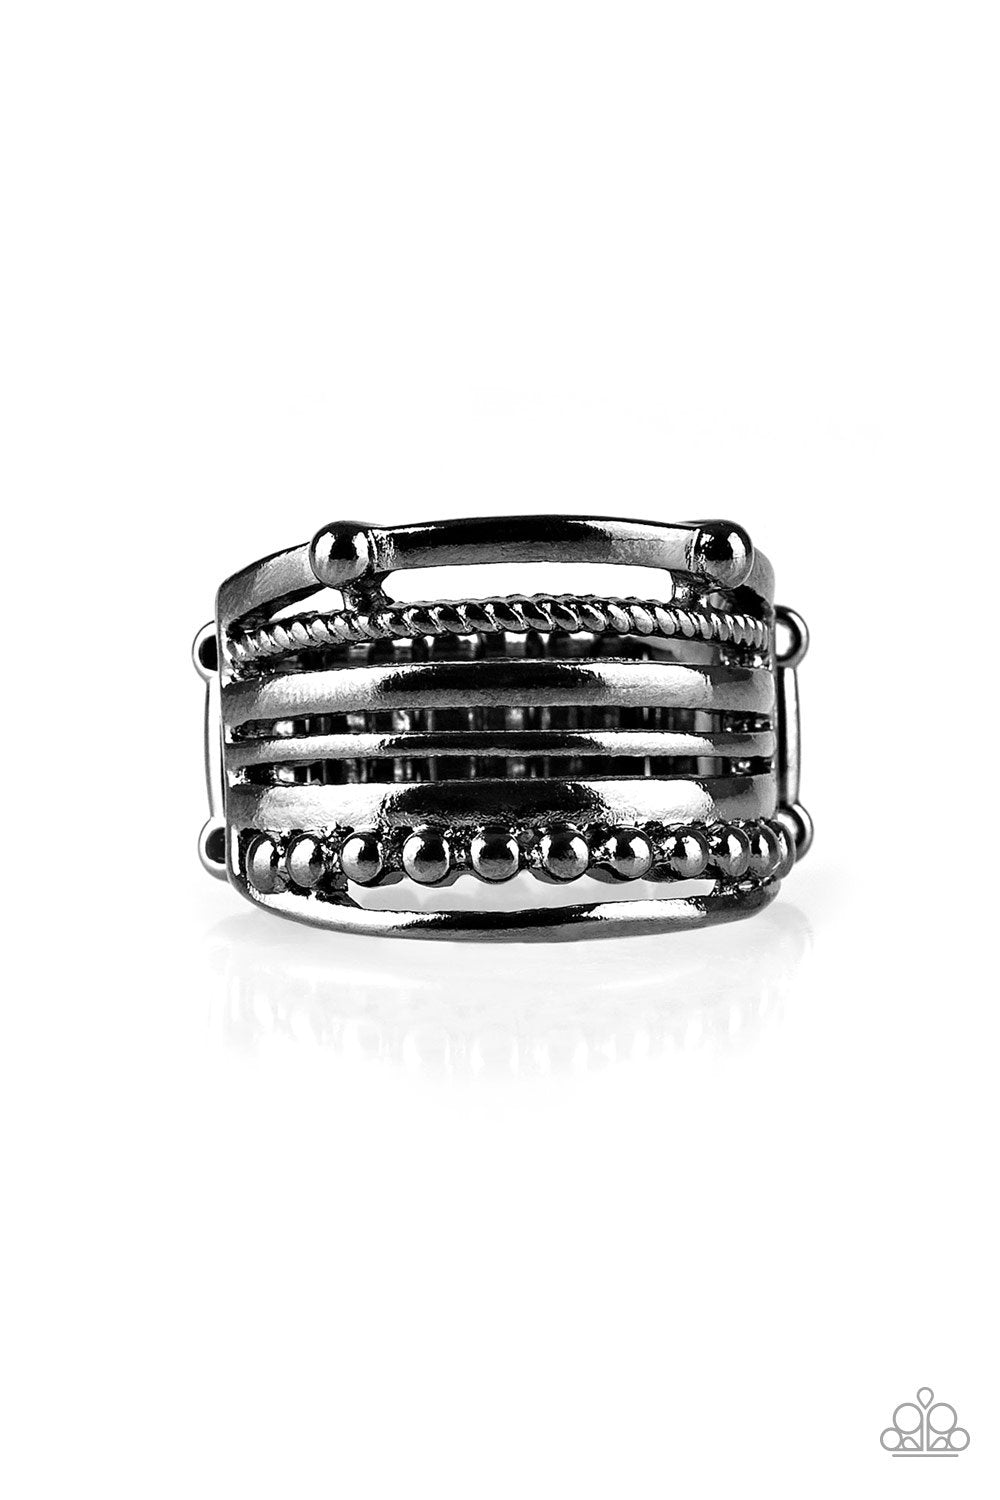 The STEEL Of The Night Black Gunmetal Ring - Paparazzi Accessories-CarasShop.com - $5 Jewelry by Cara Jewels